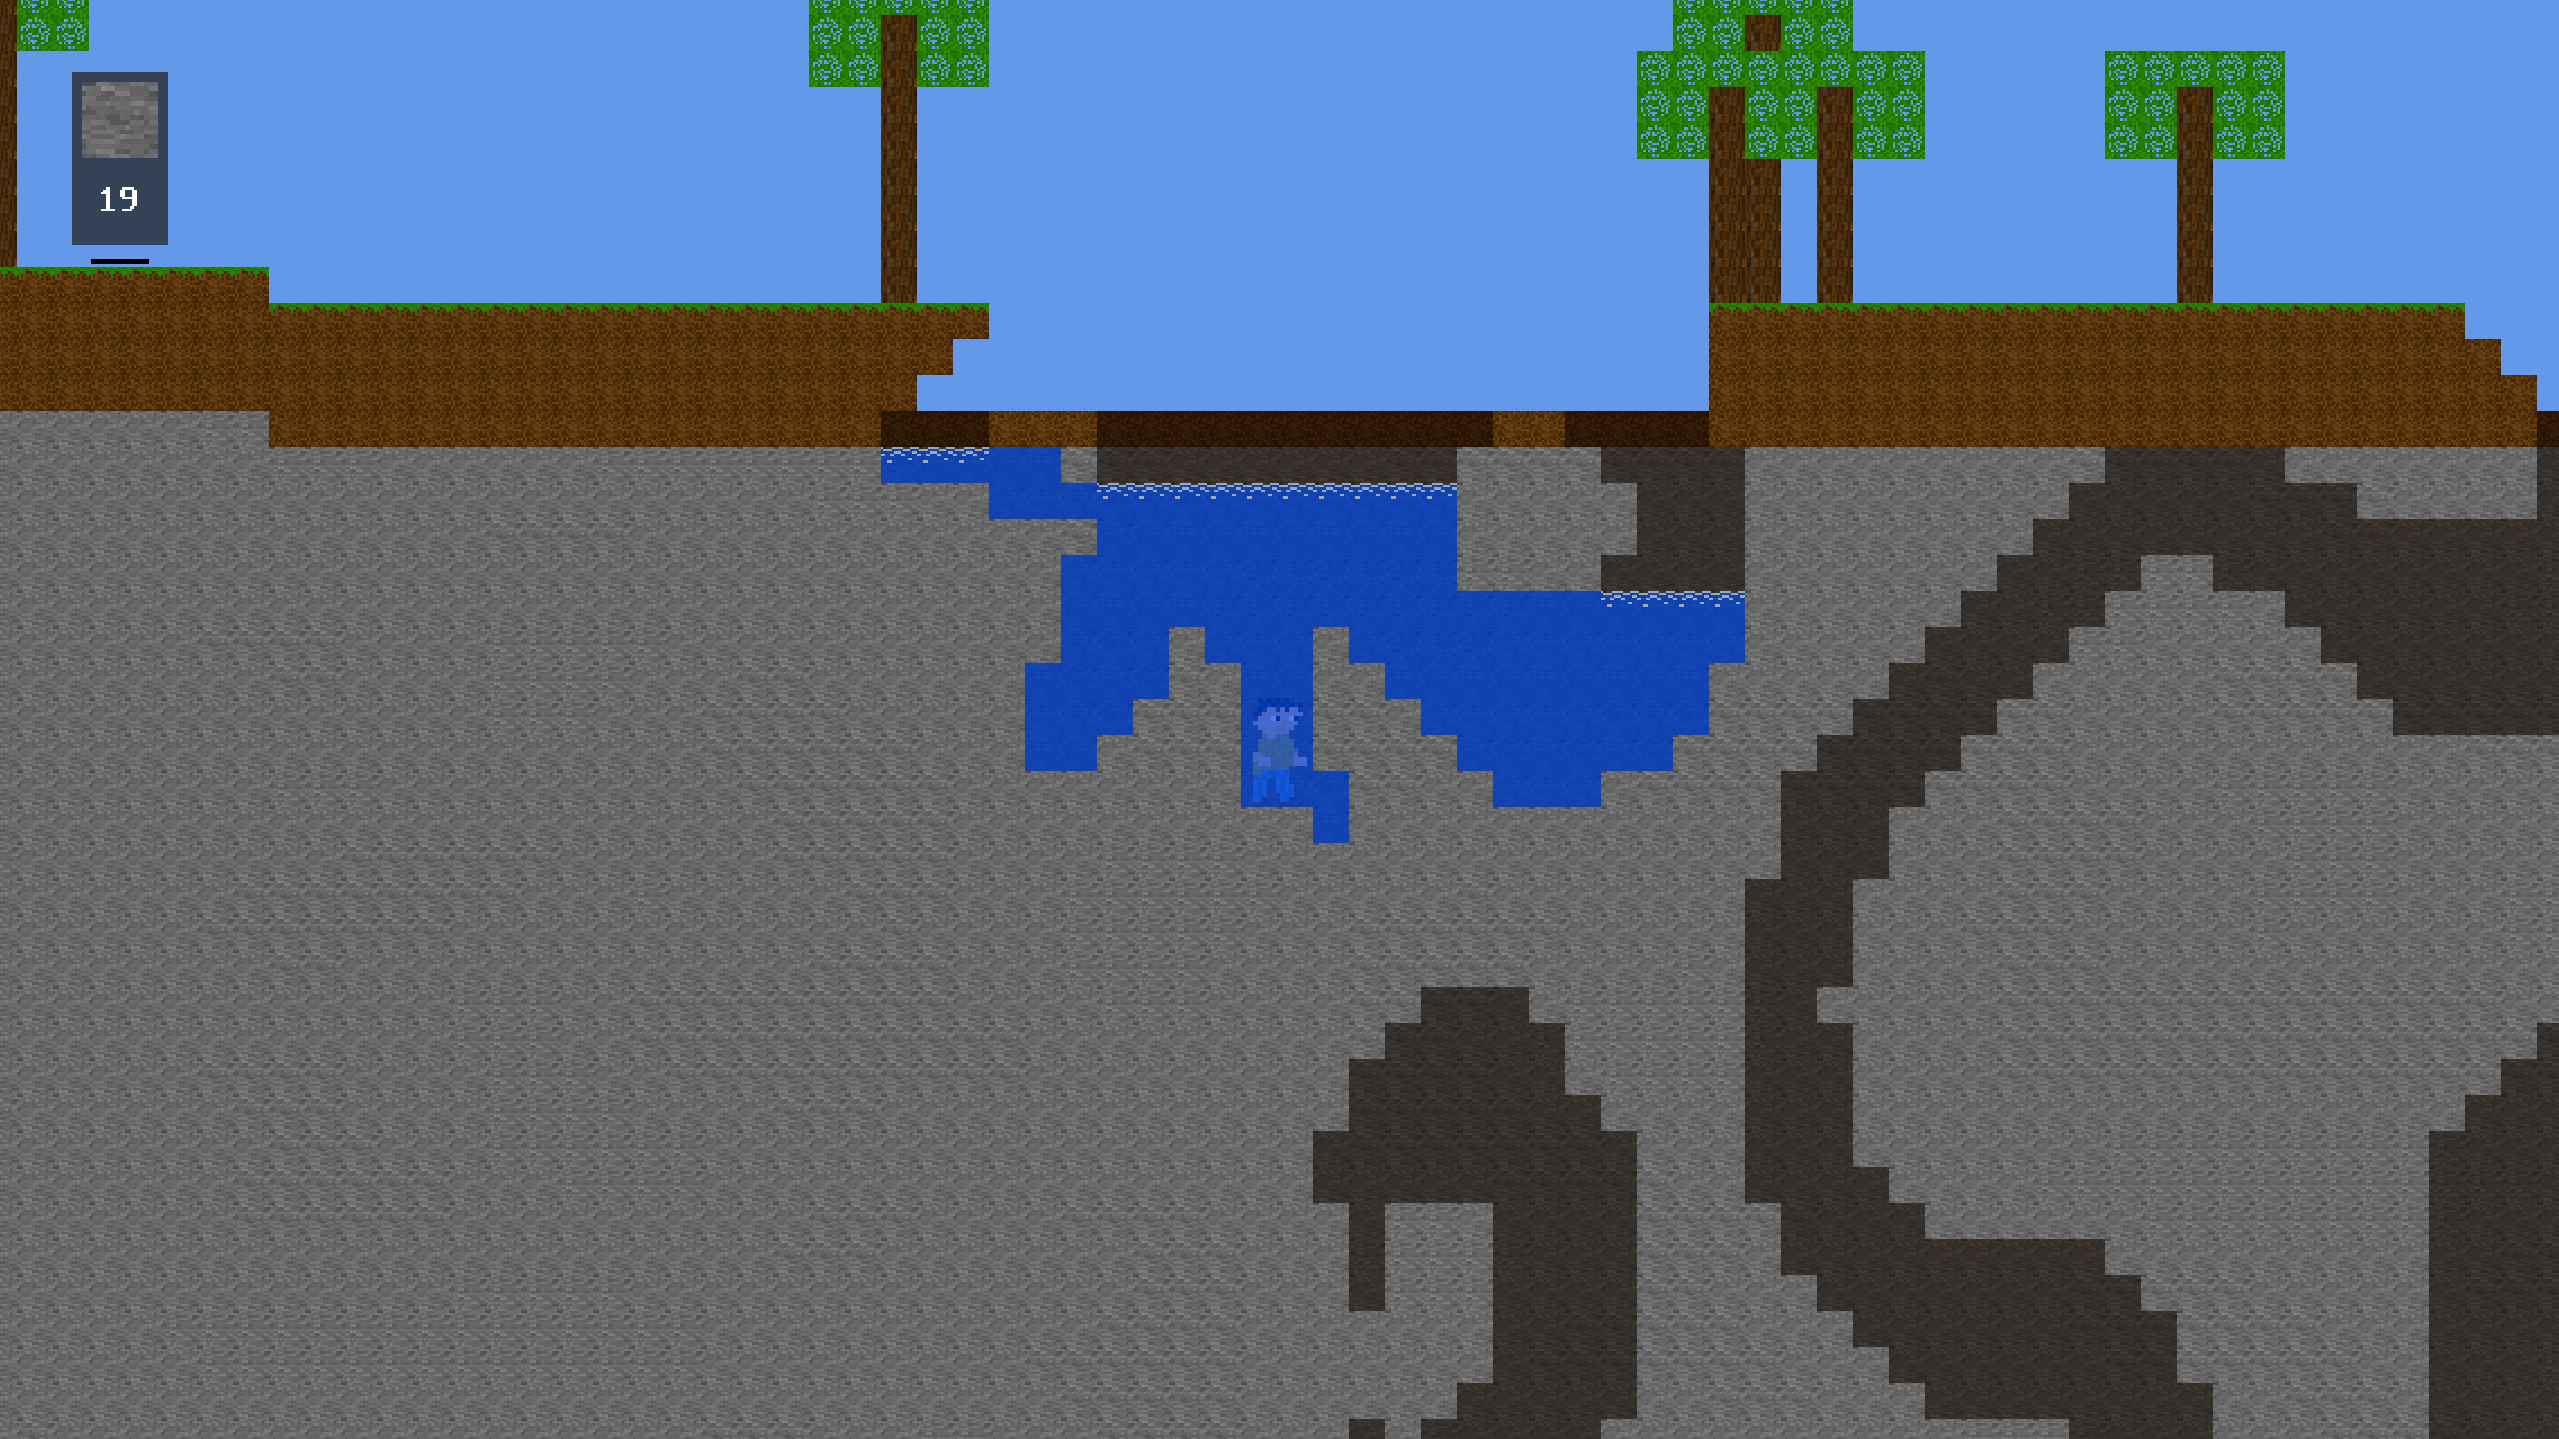 Player is standing at the bottom of a lake residing in a crater on the world's surface. Some trees also visible nearby. Few caves visible far away.